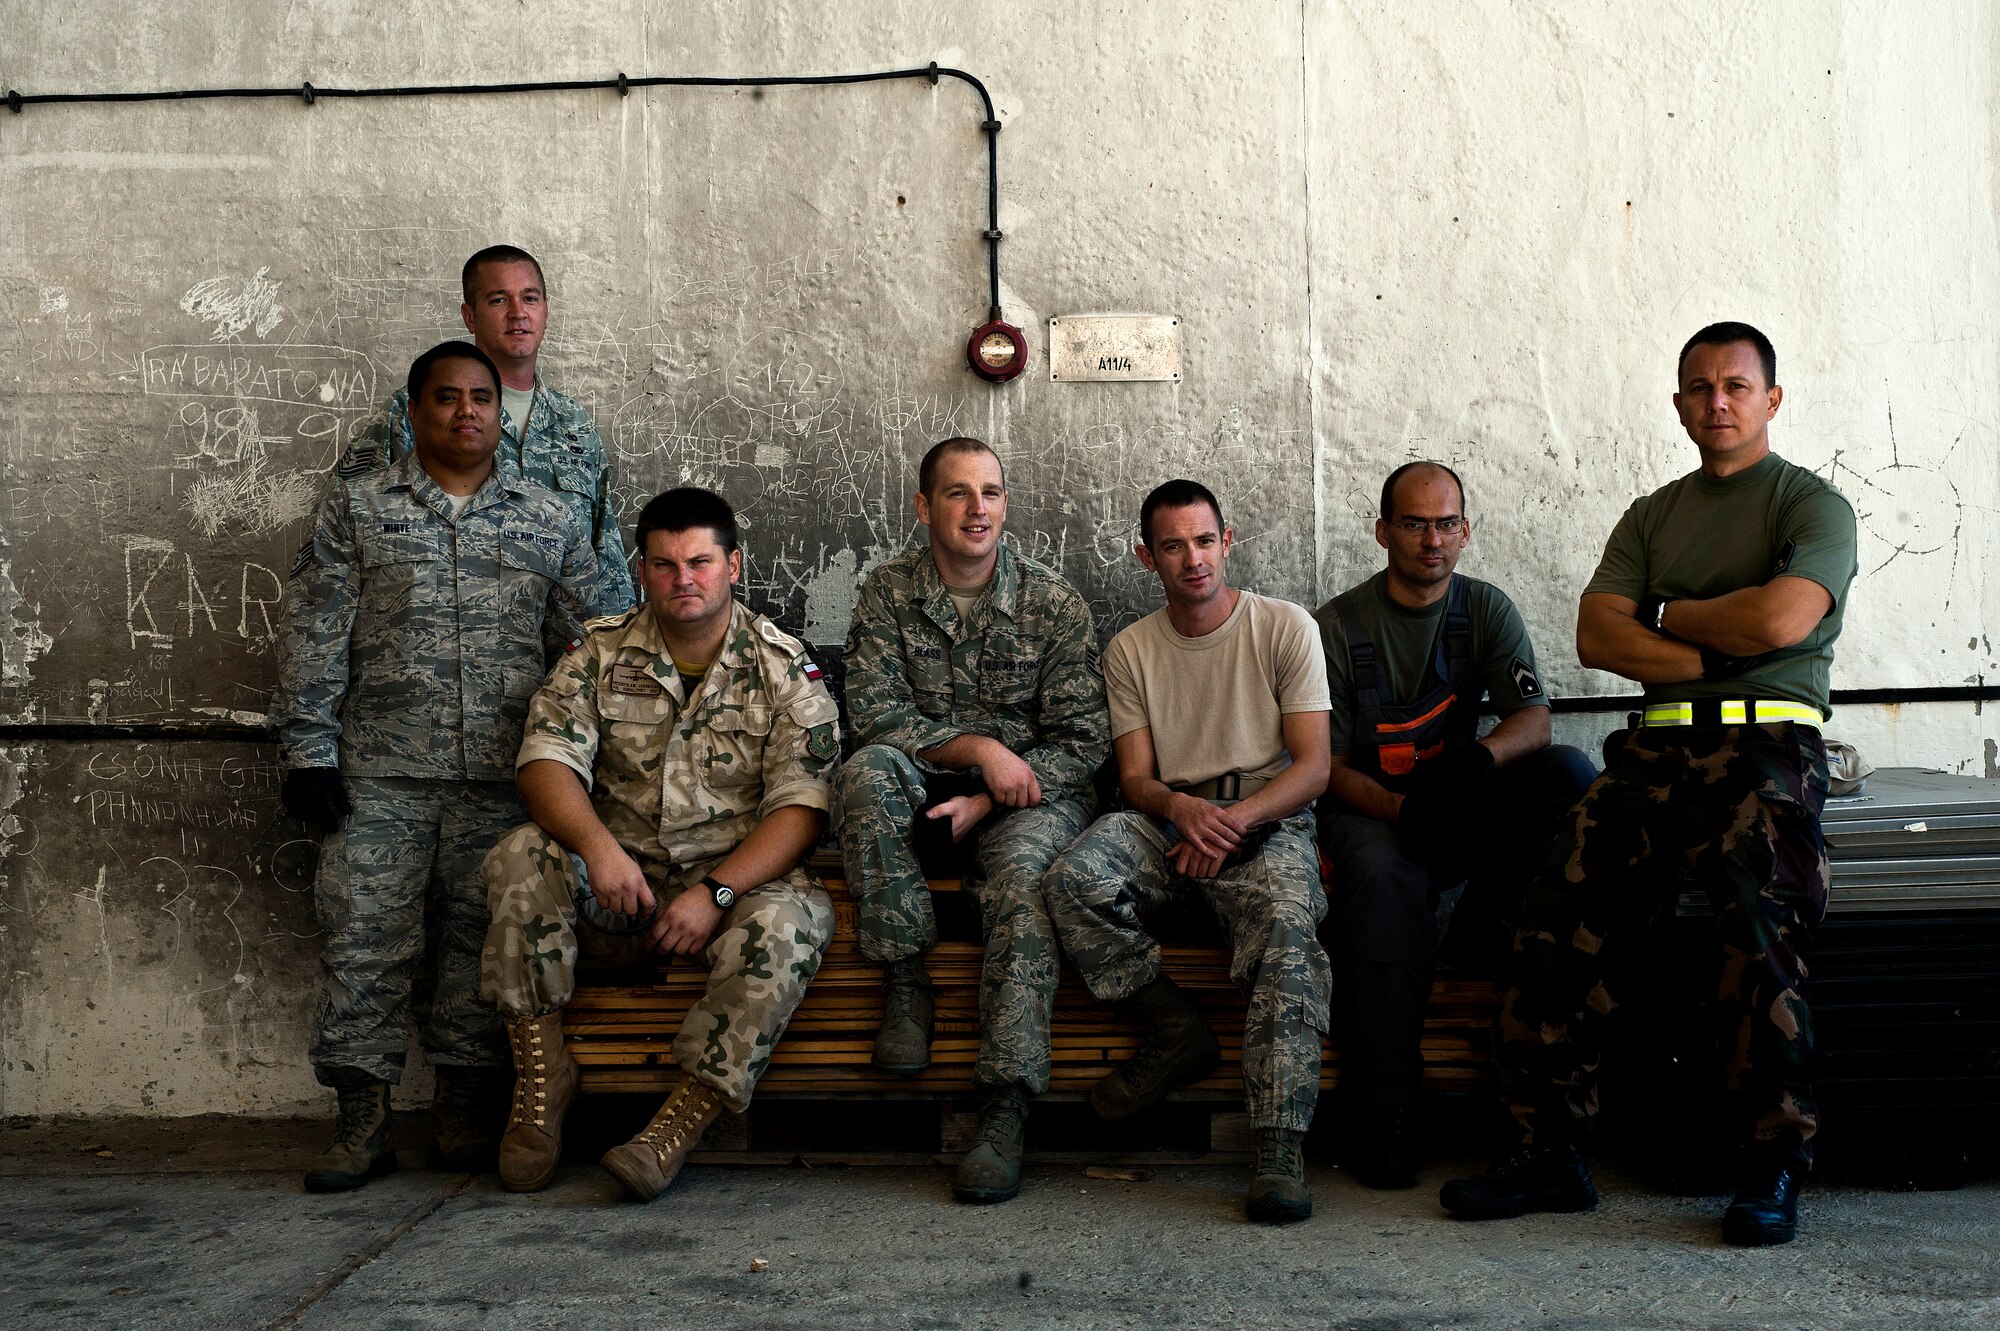 (From left) Tech. Sgt. Brian Robisky, Tech. Sgt. Kevin White, Polish air force Sgt. Przemyslaw Jakubczak, Staff Sgt. Erik Blass, Staff Sgt. Justin Van Schefel, Hungarian air force Capt. Tamas Soter and Hungarian air force Sgt. Ternec Gelenscer are aerial porters assigned to the Heavy Airlift Wing at Papa Air Base, Hungary. The aerial porter section is made up of nine members from five different countries, who work alongside their Hungarian counterparts. (U.S. Air Force photo/Tech. Sgt. Bennie J. Davis III)